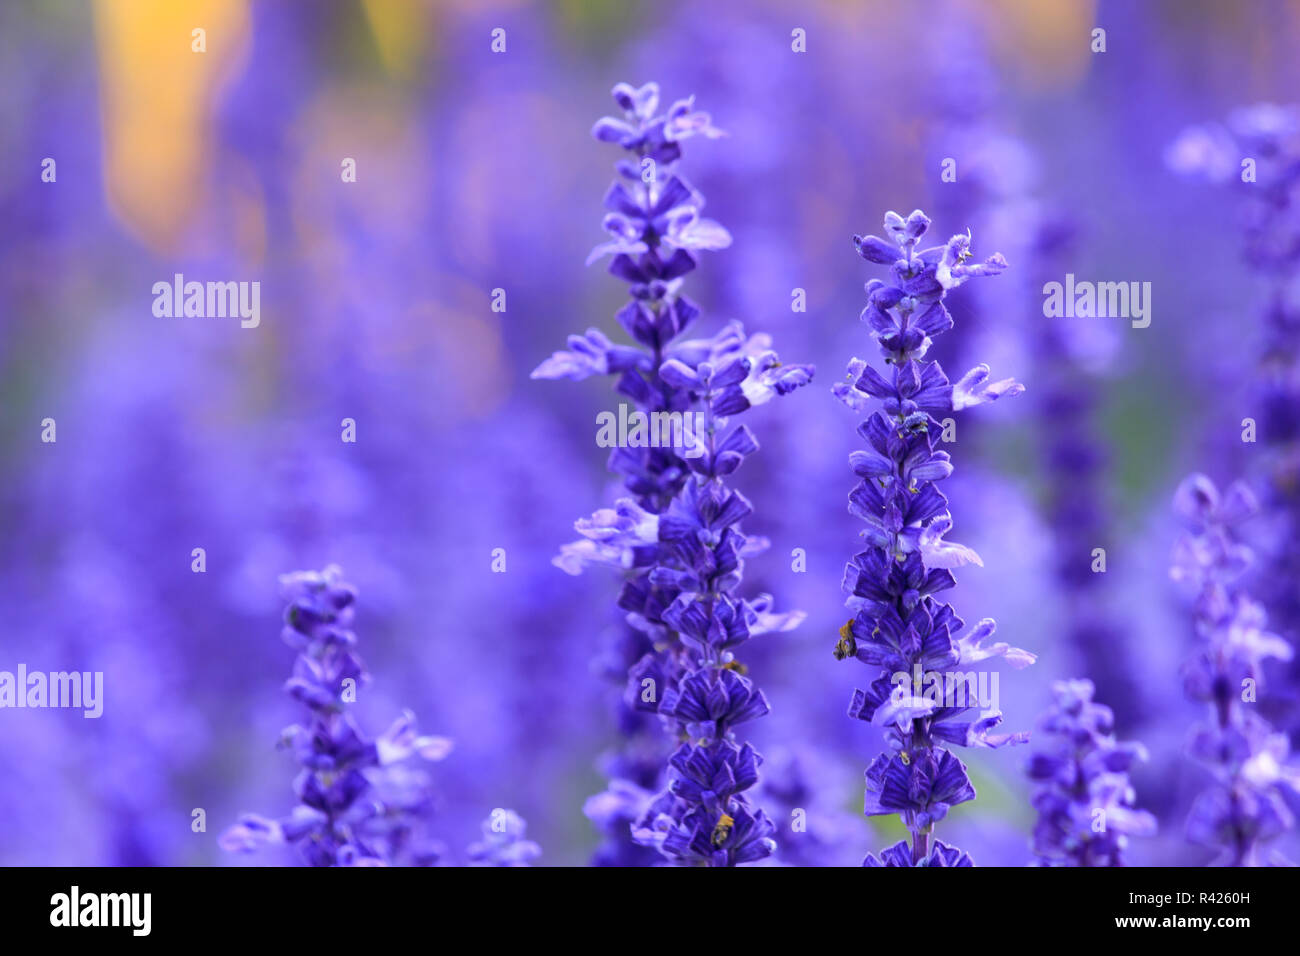 Victoria Blue salvia flowers are blooming. Stock Photo